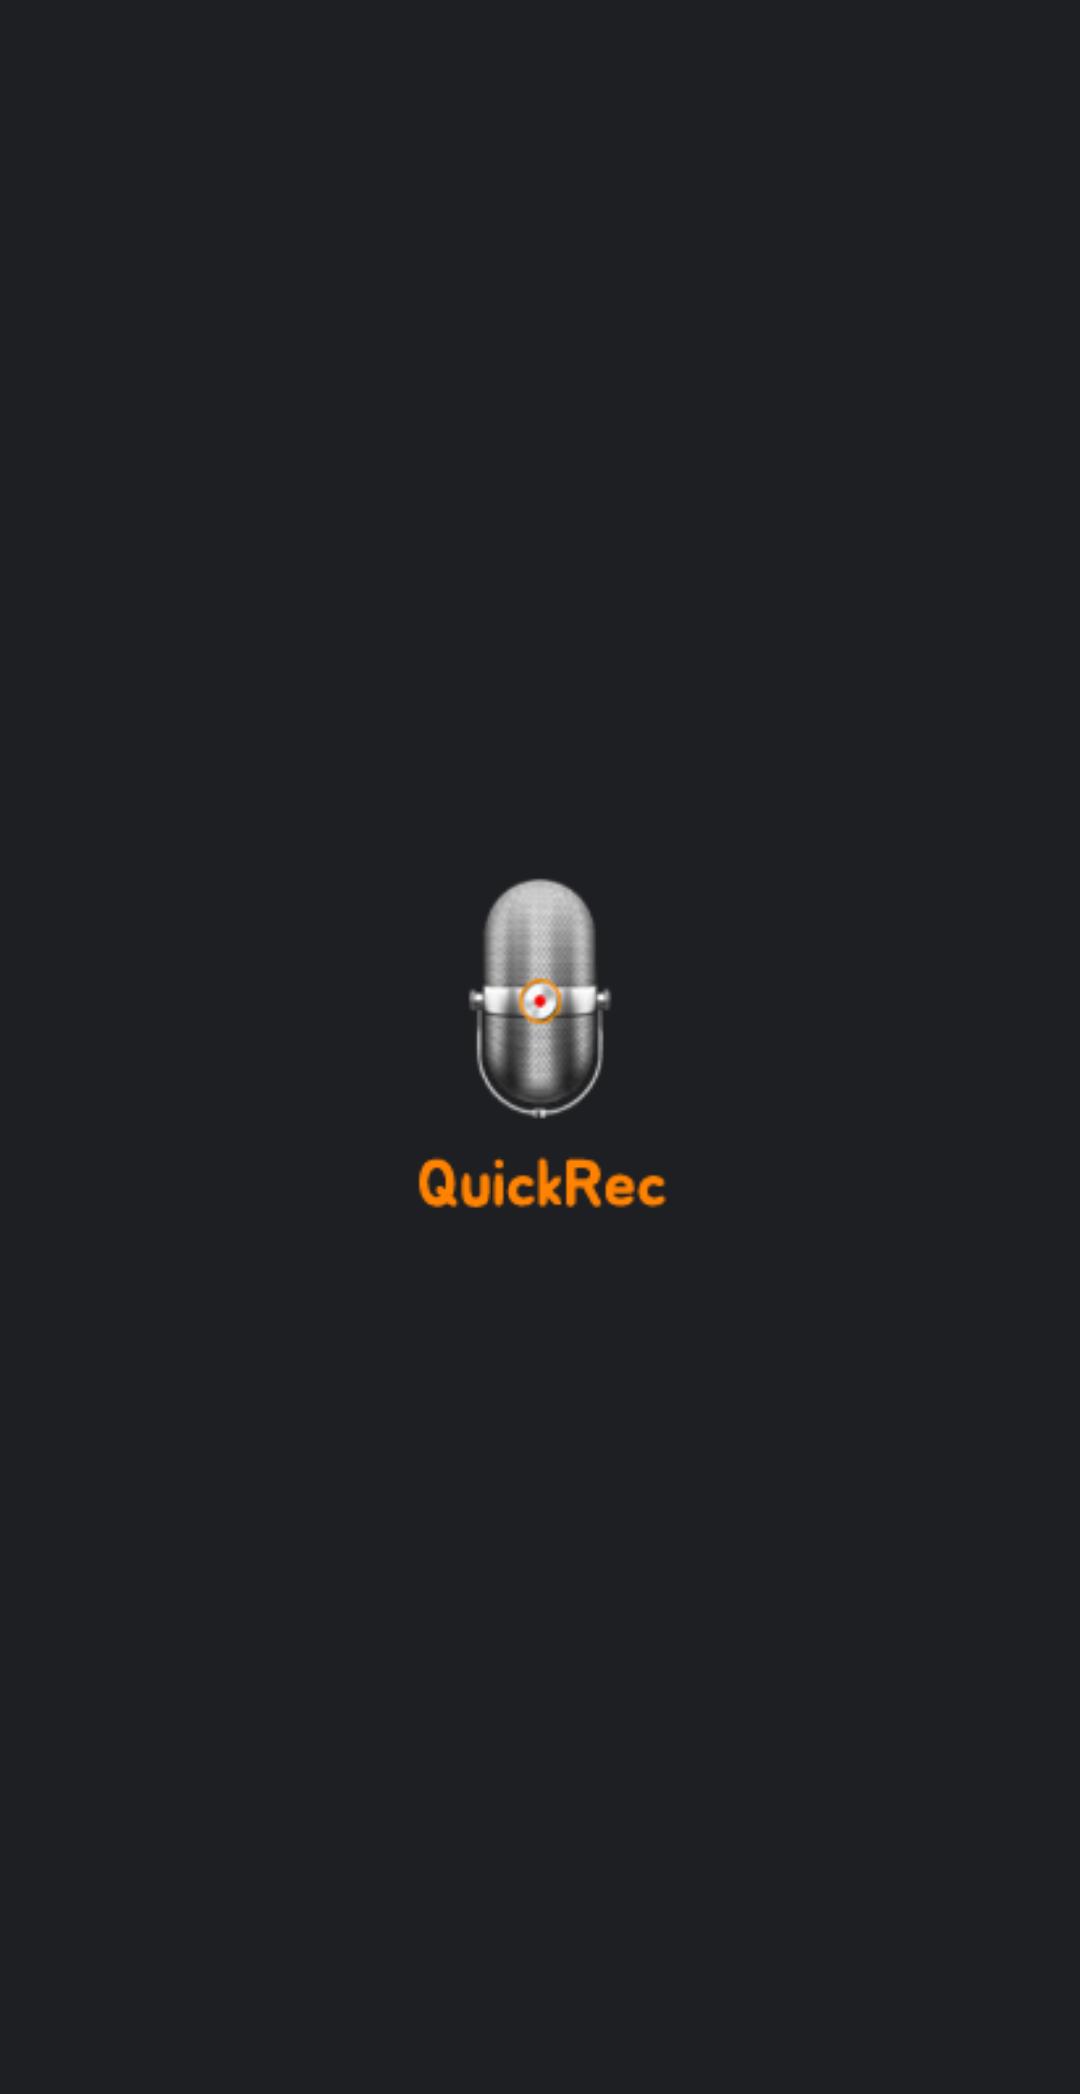 Audio & Voice Recorder(MP3, WAV) - QuickRec for Android - APK Download